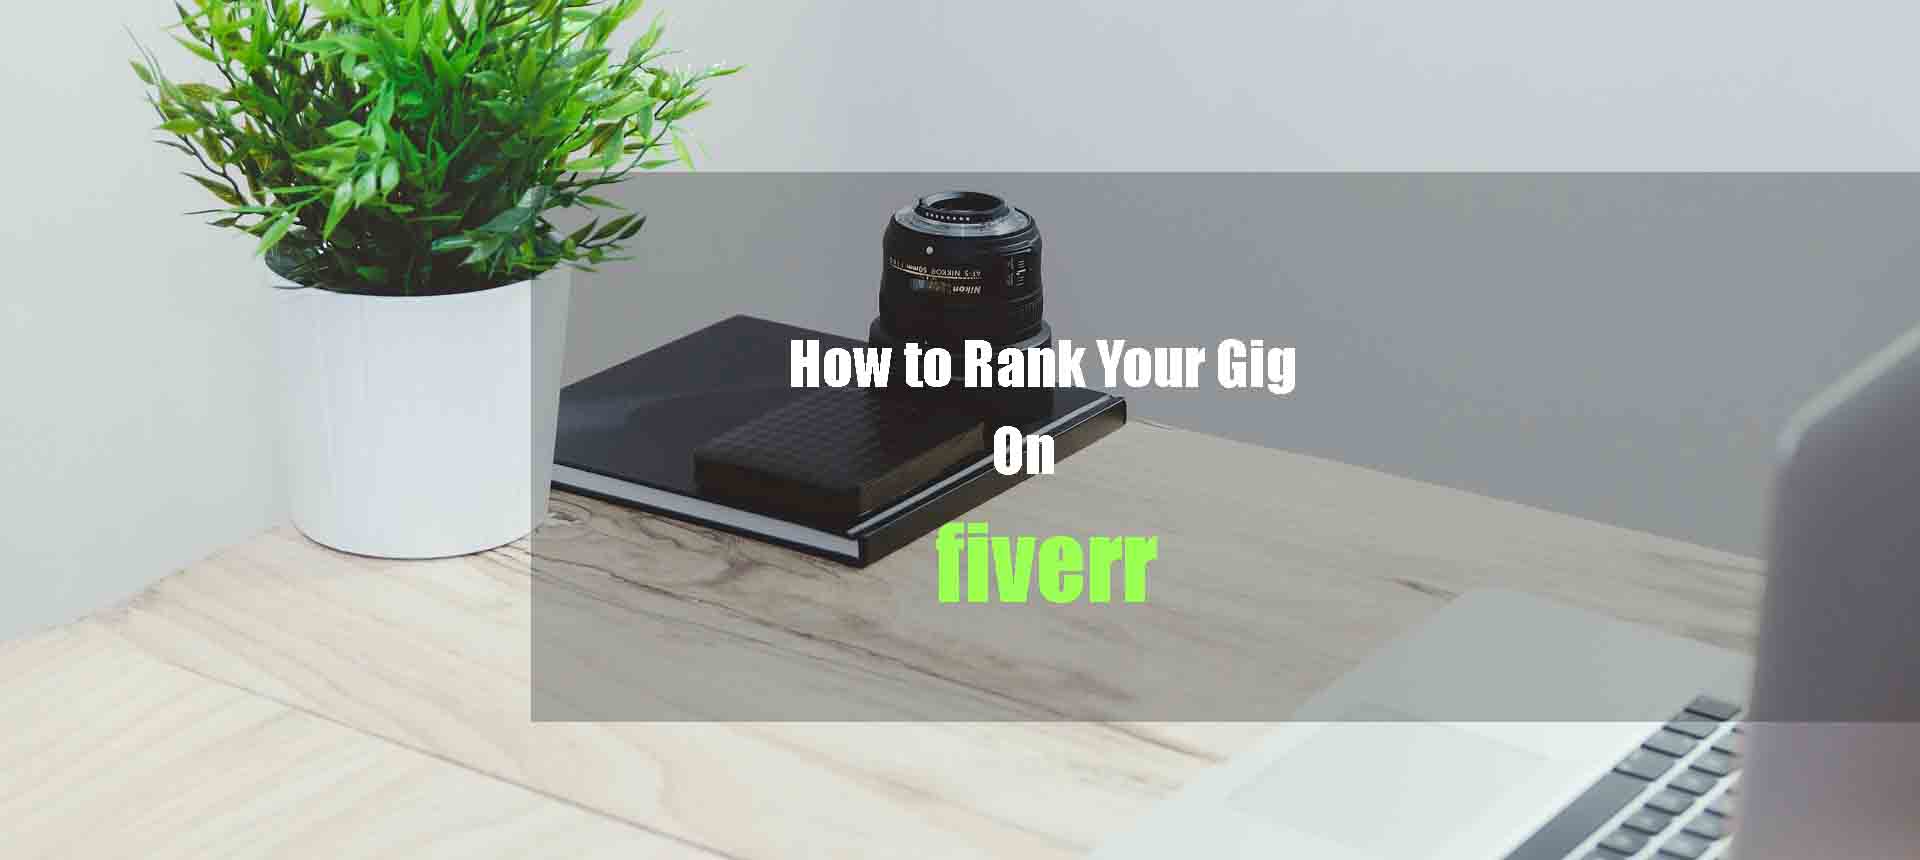 How to rank a gig on Fiverr